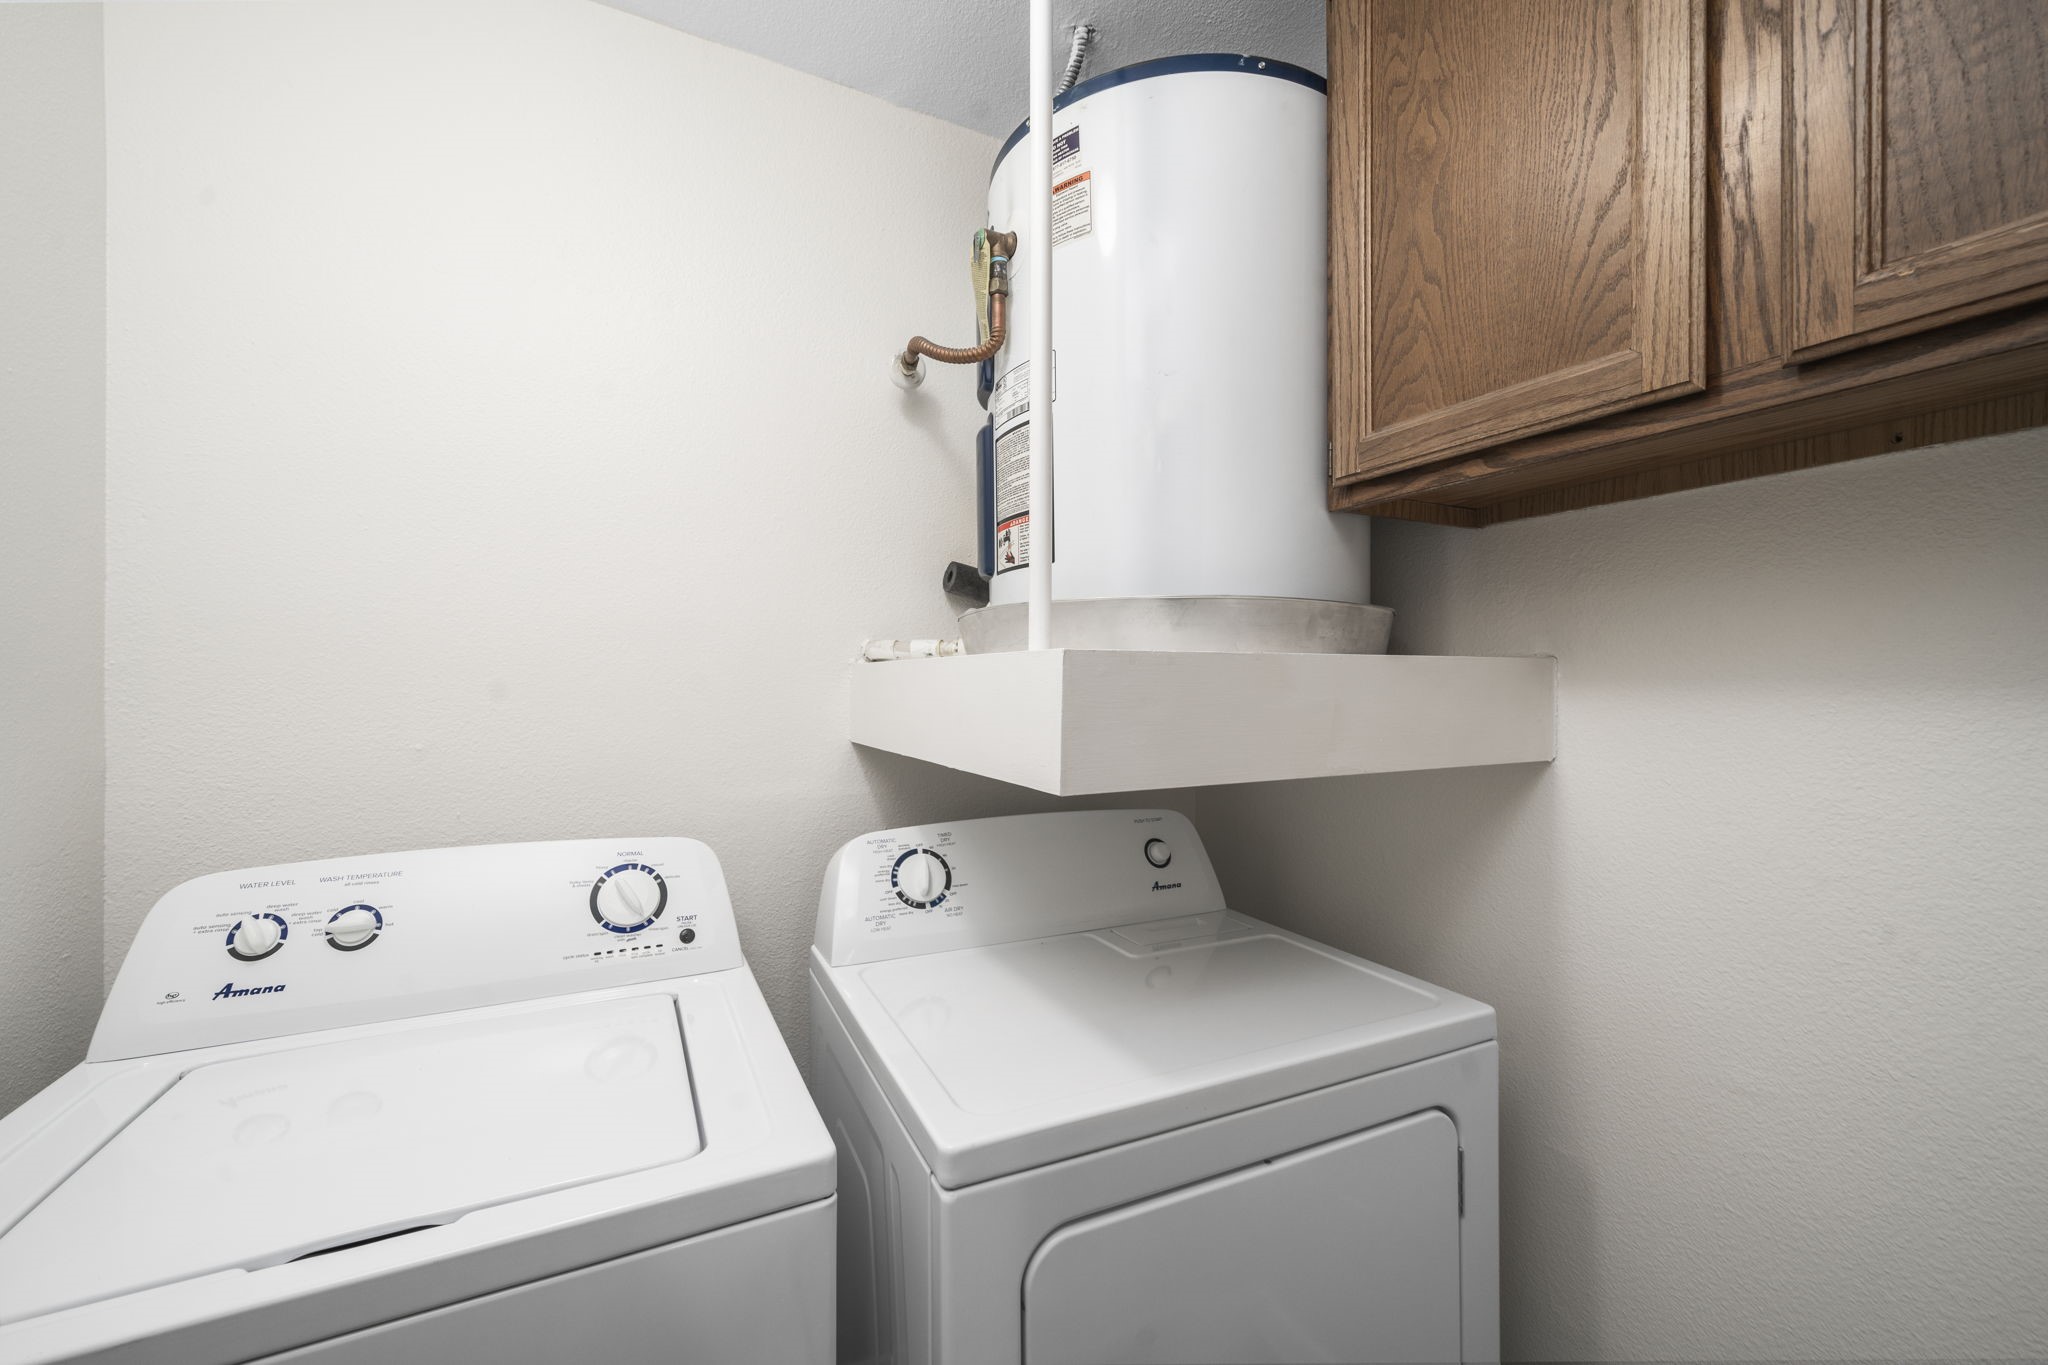 Additionally, the unit comes complete with a full-sized washer and dryer set for your convenience.